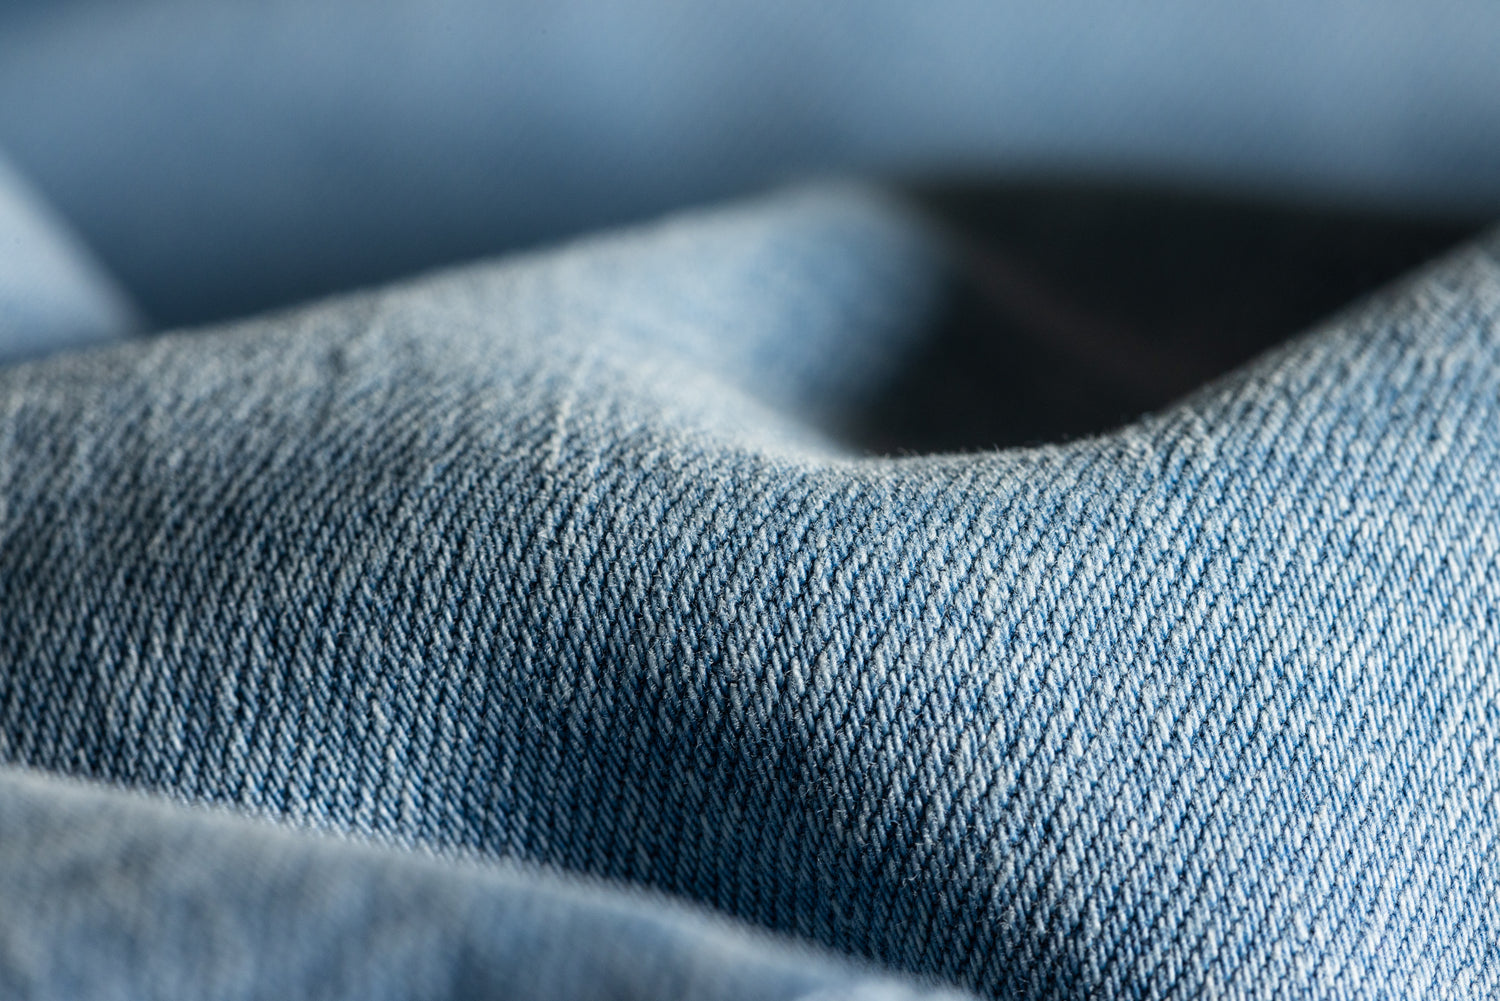 A close up of light wash denim jeans. It is so zoomed in that you can see the stitching of the jeans.